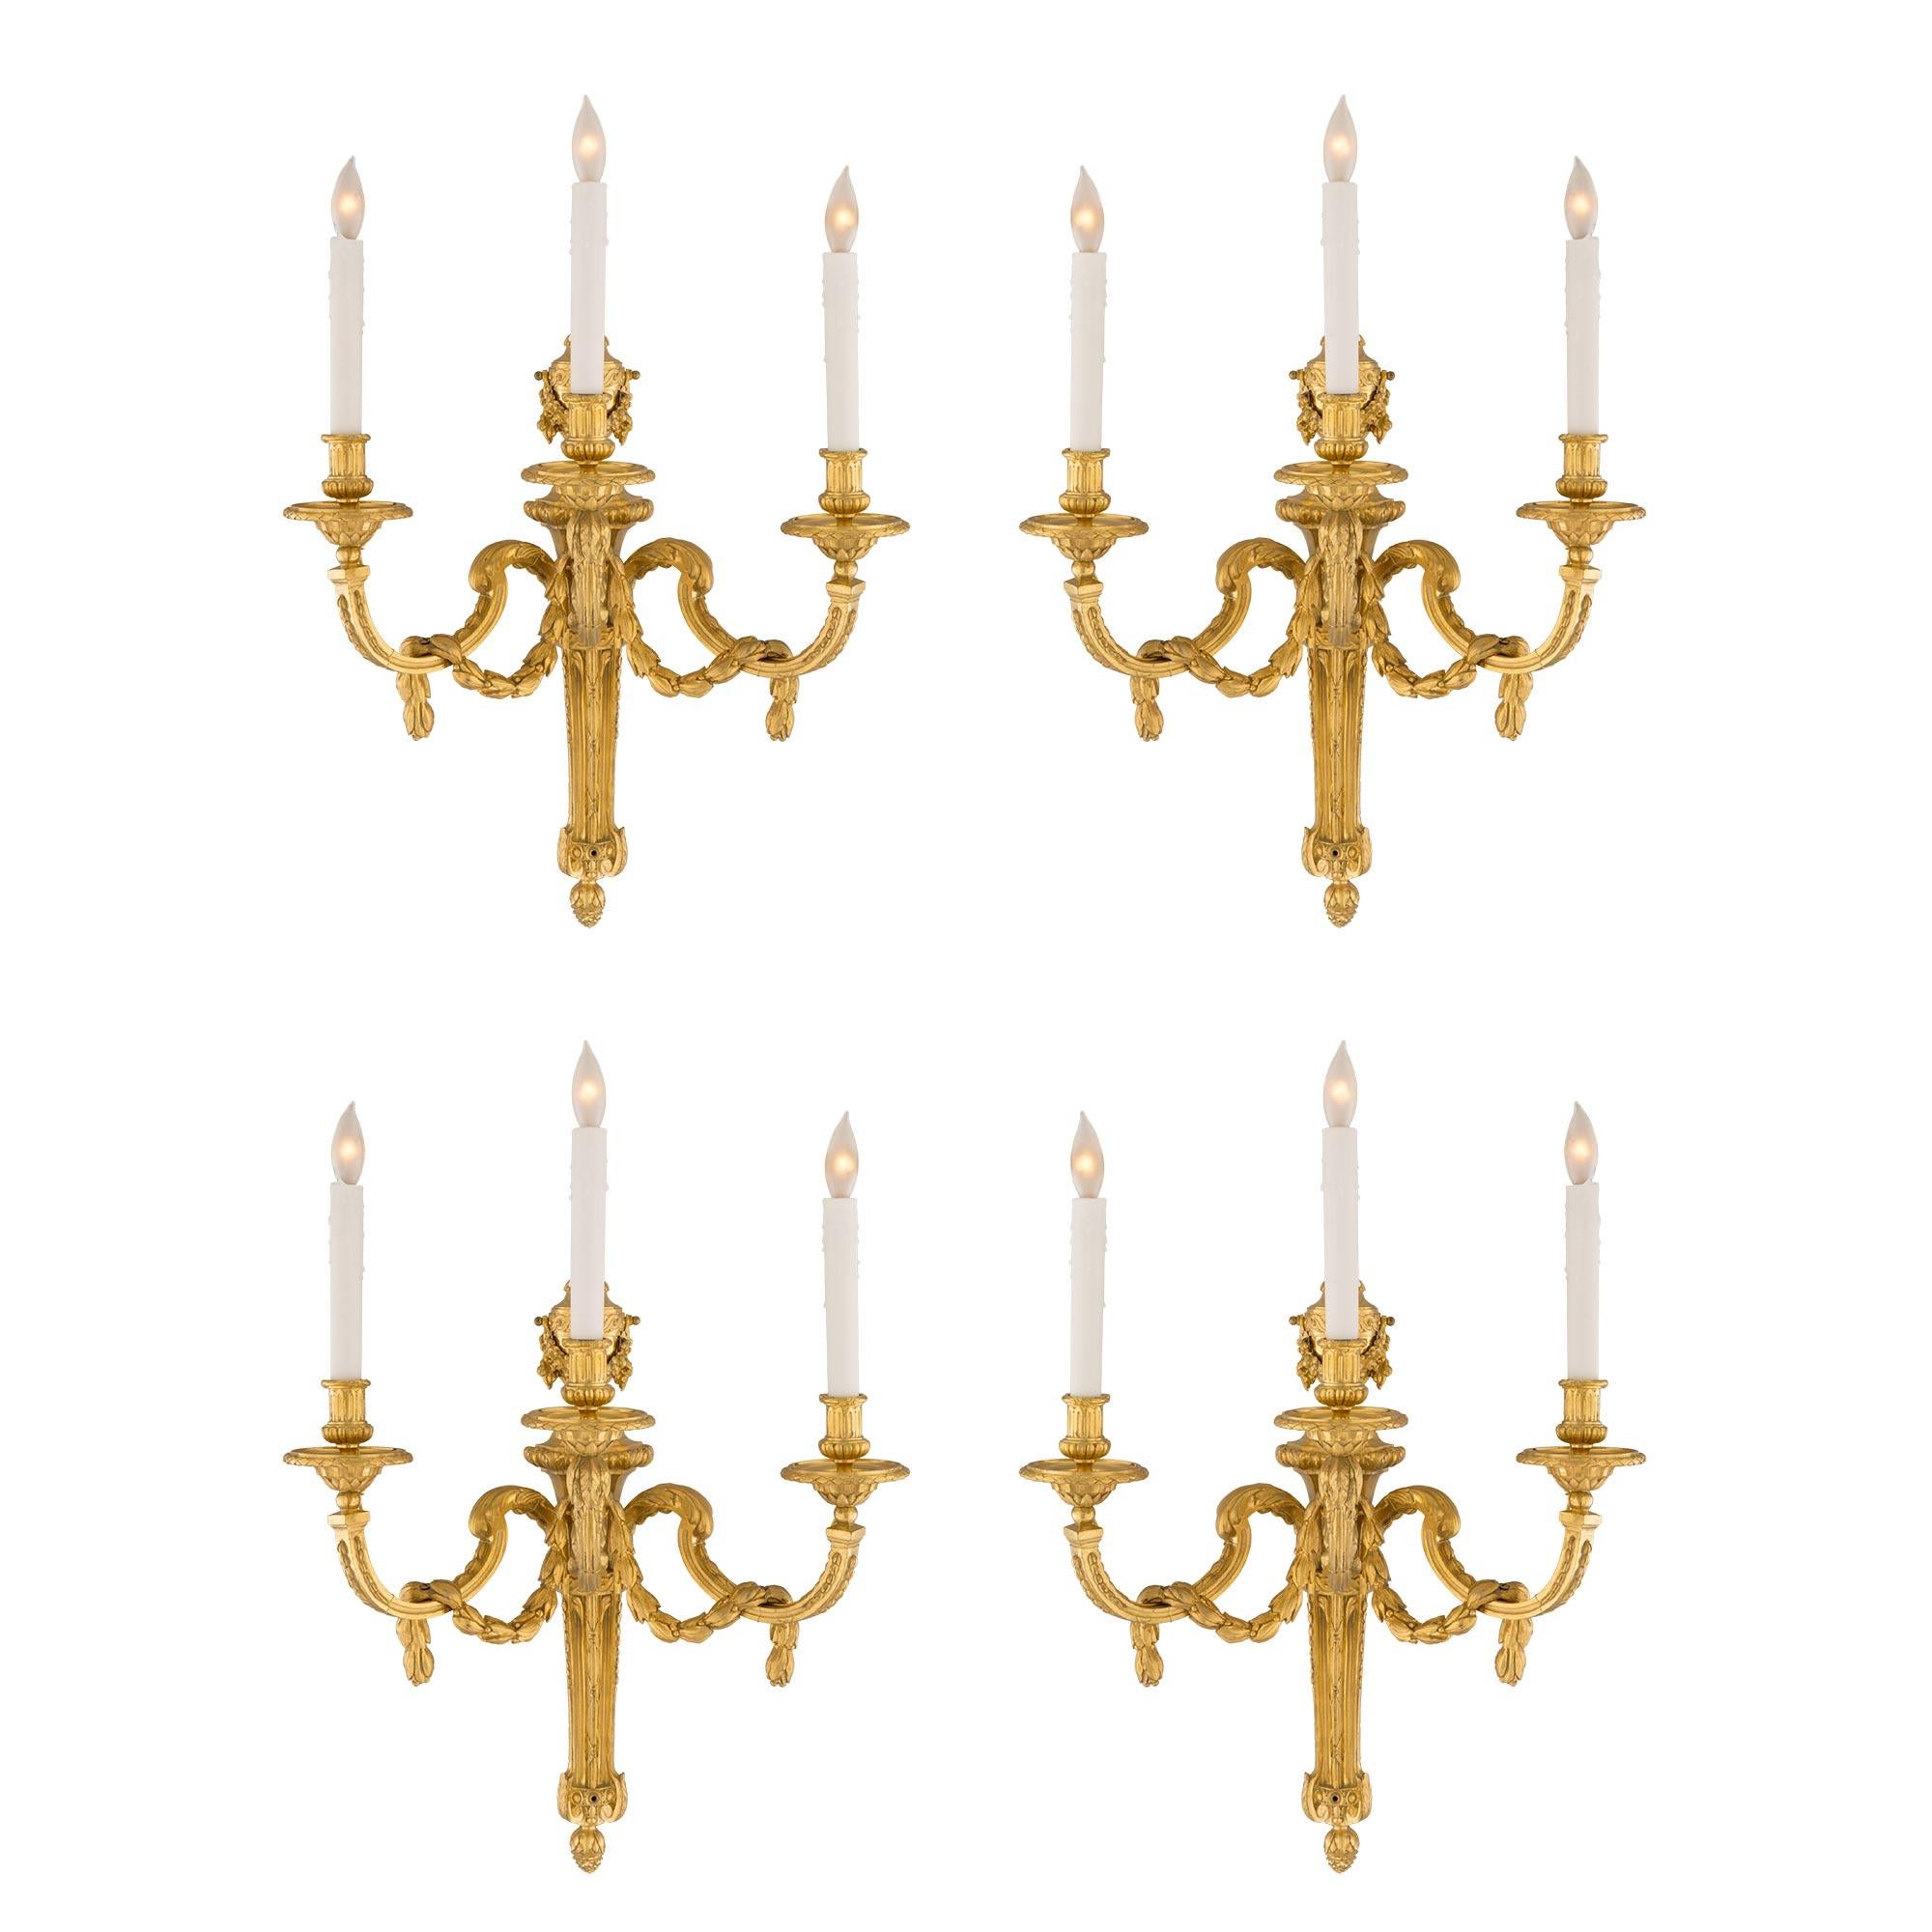 A sensational and grand scale set of four French mid-19th century Louis XVI style three light ormolu Bras de Lumière sconces. Each sconce is centered by a tapered, fluted and highly chased ormolu support with an inverted bottom acorn finial. The